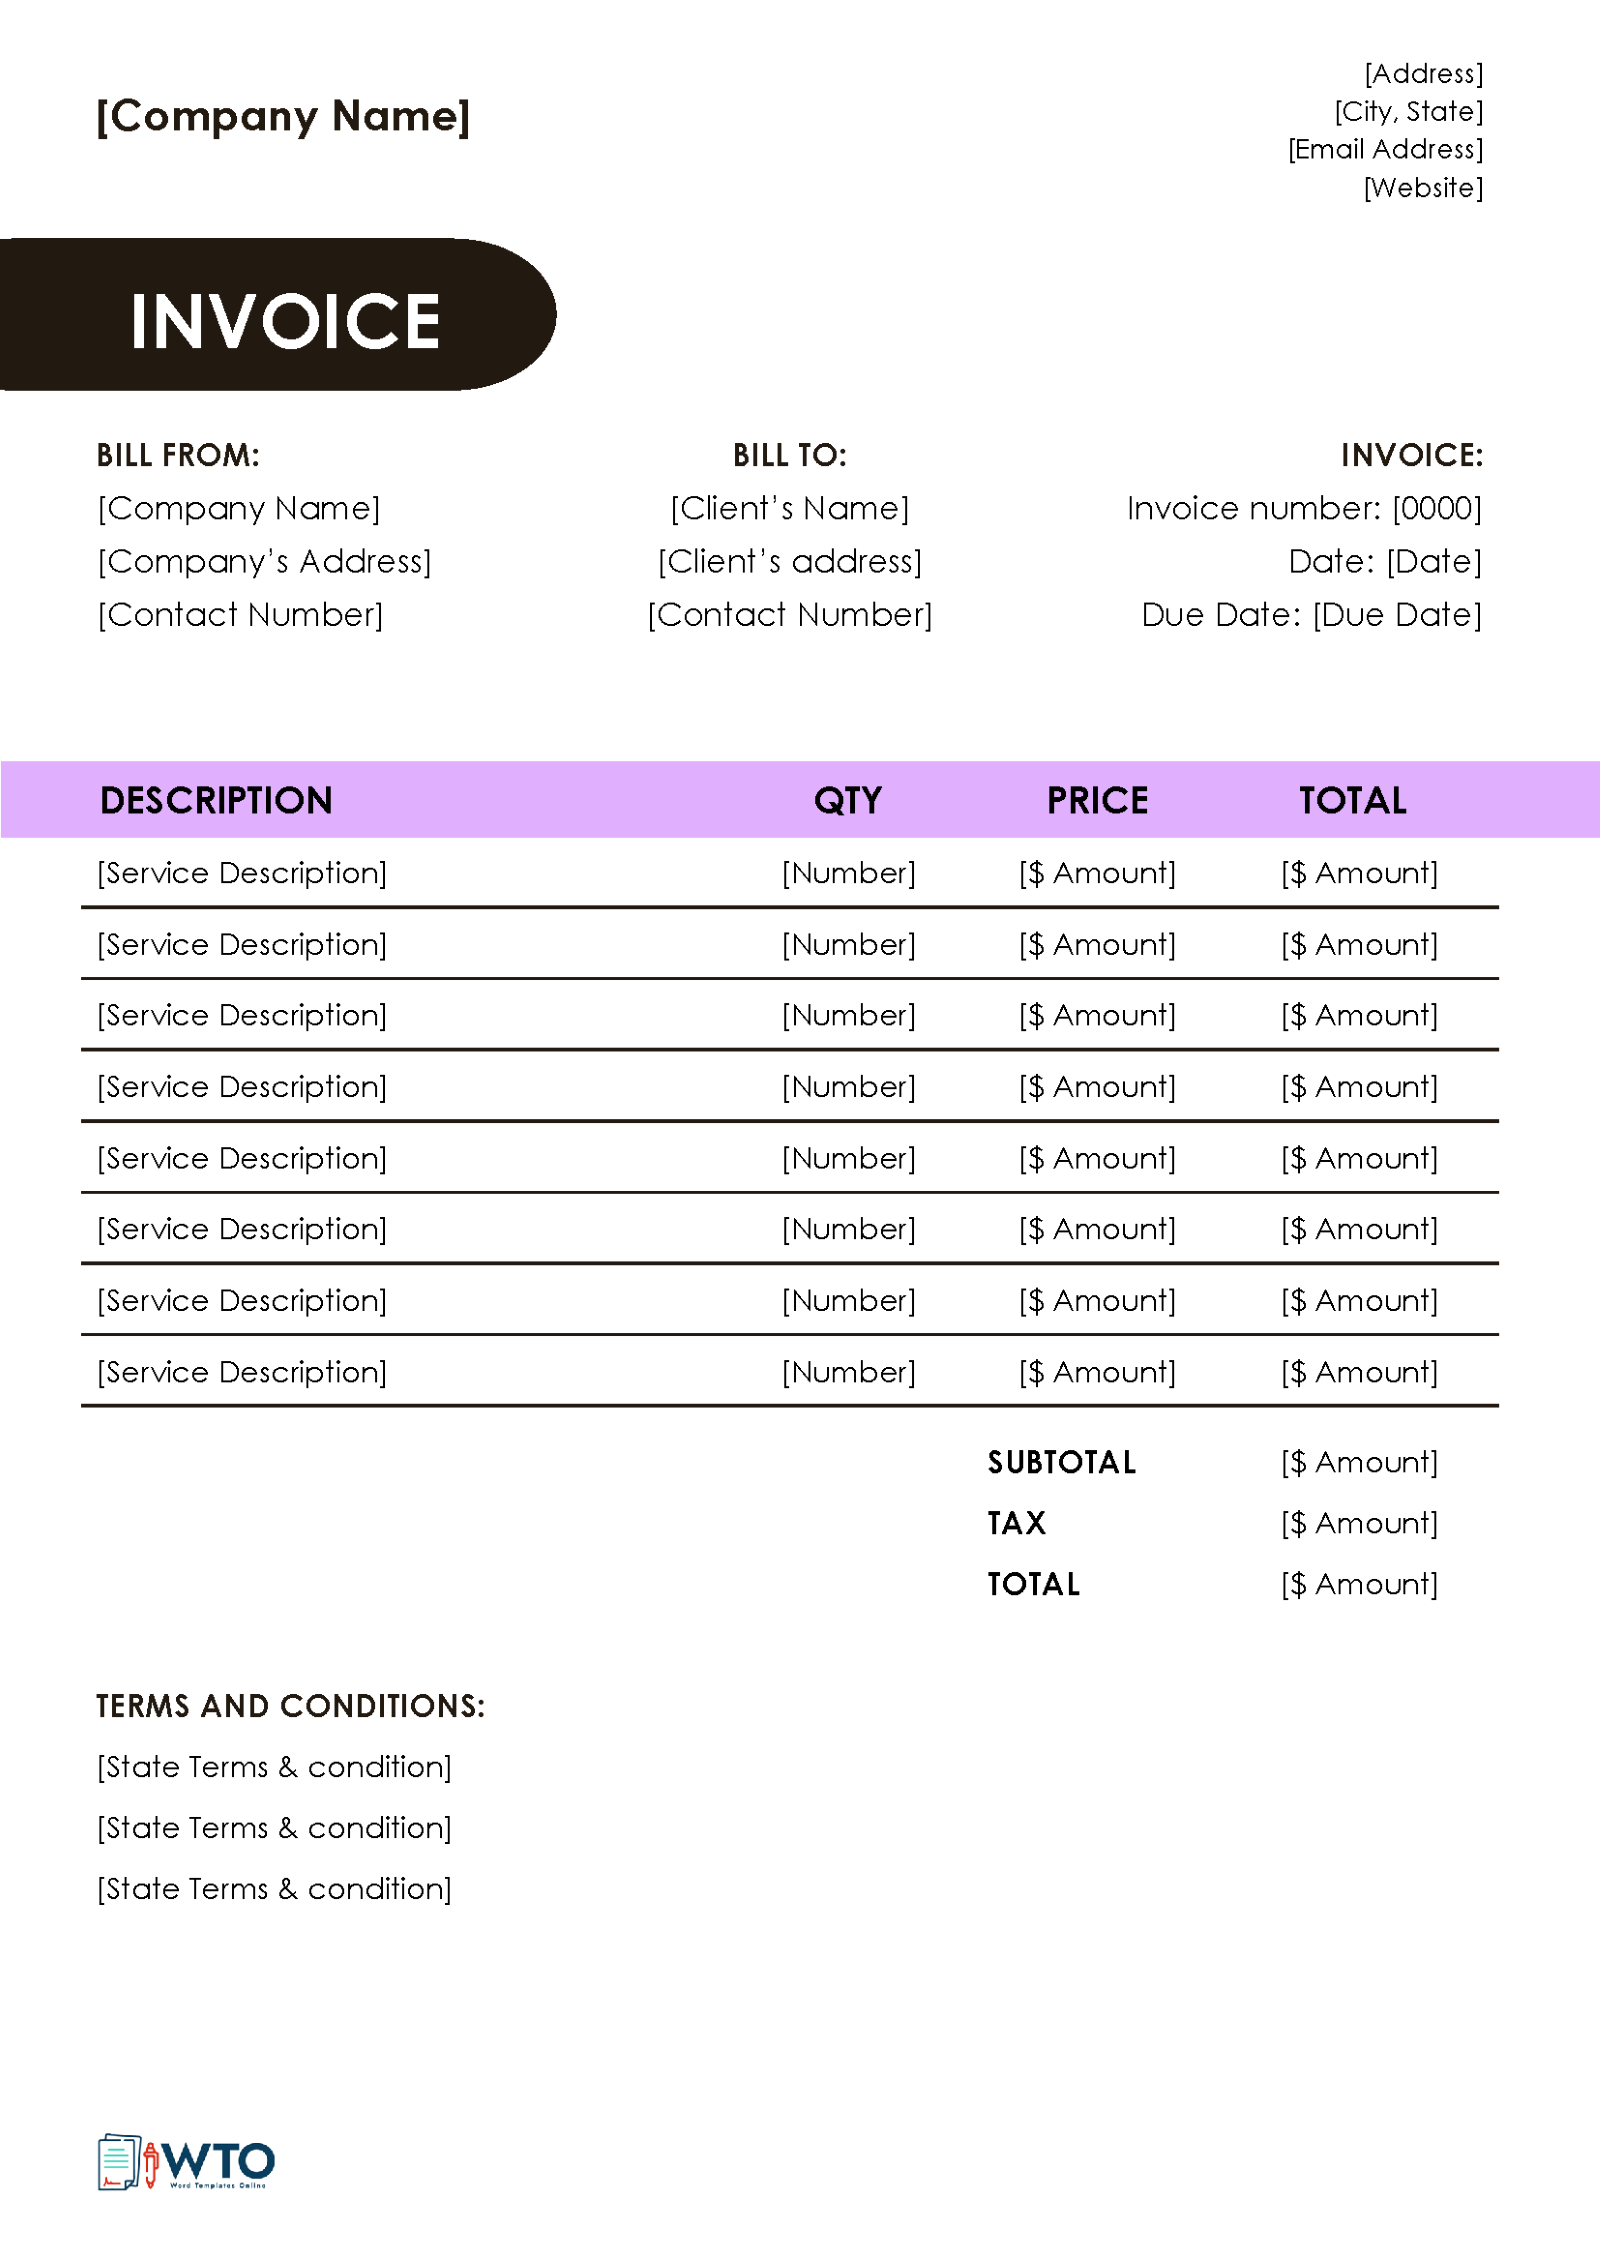 Invoice for Construction Work - Template Included